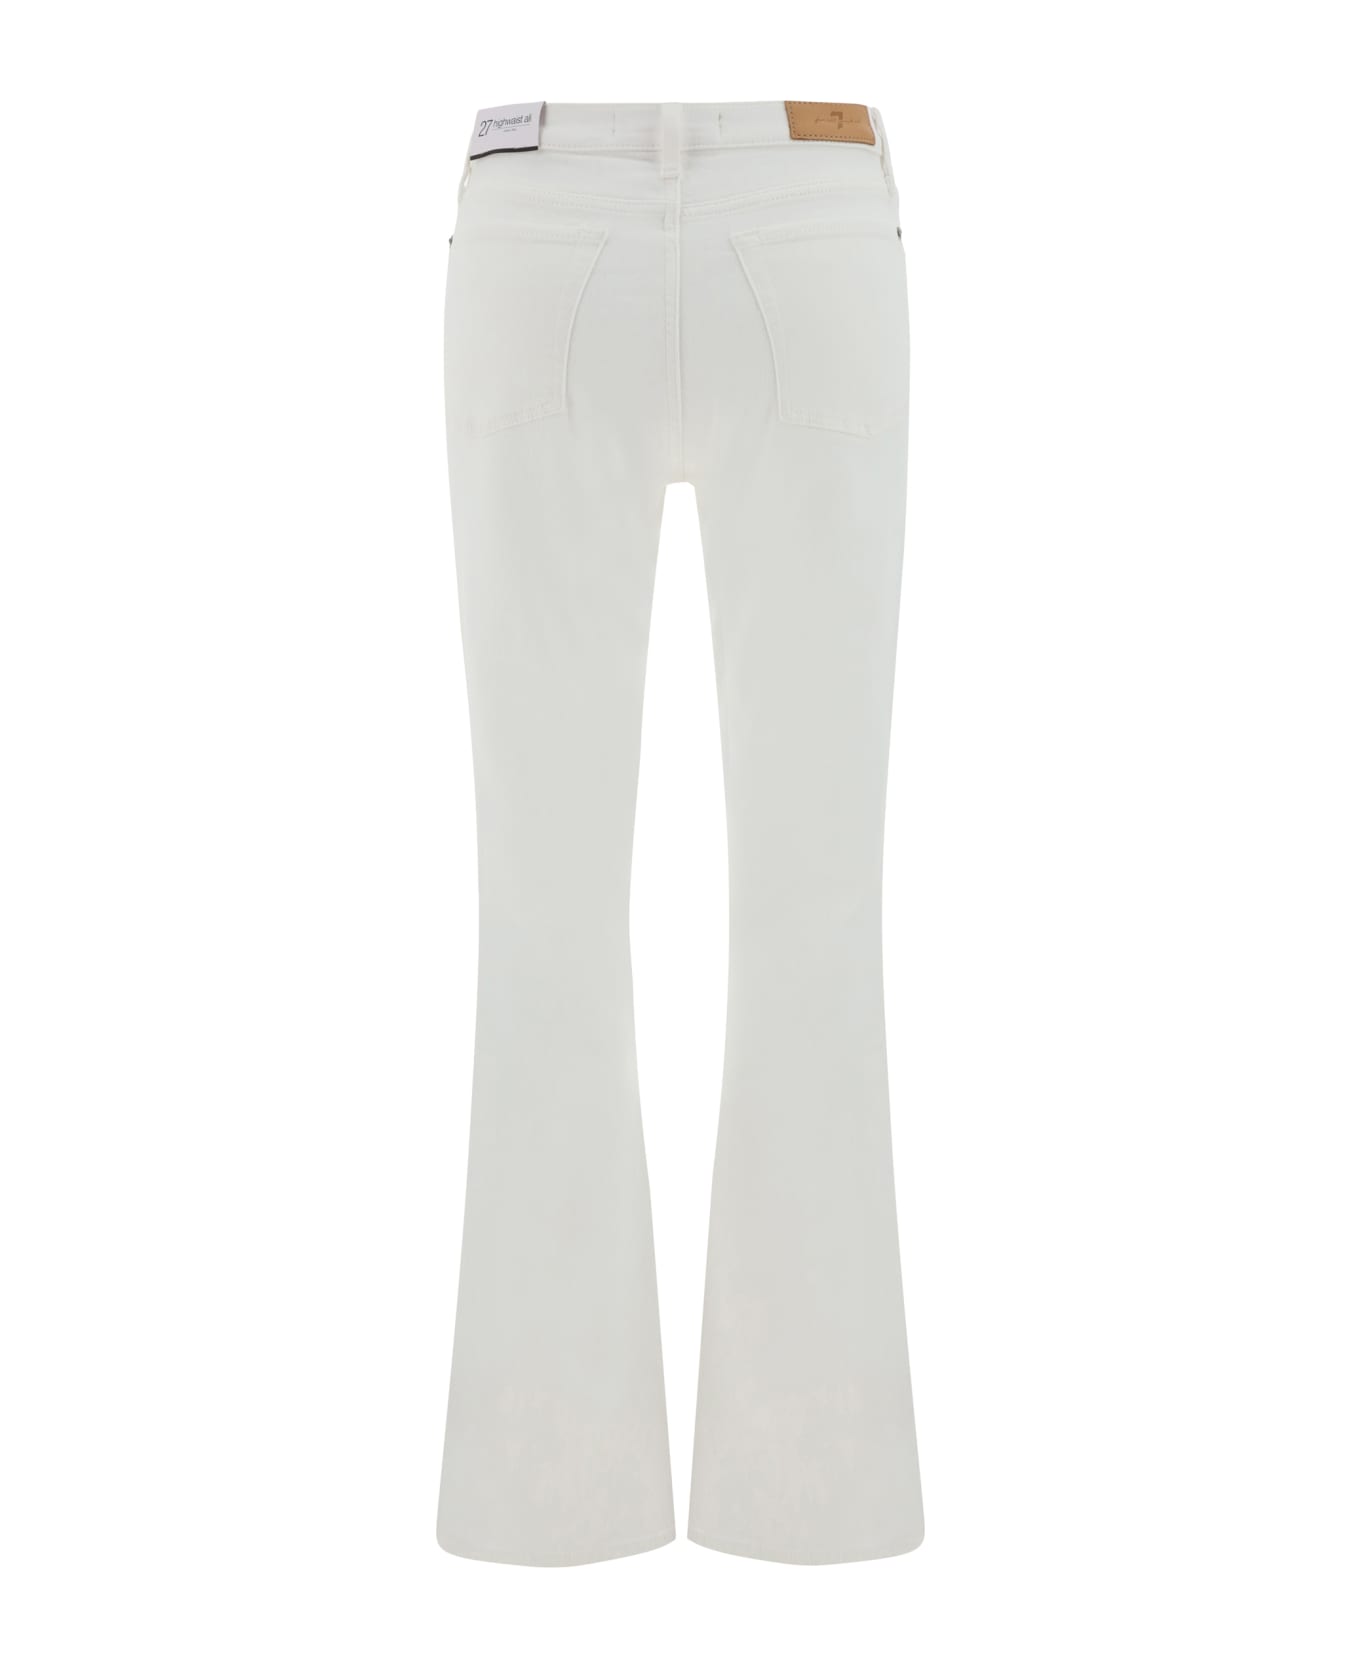 7 For All Mankind Soleil Pants - White